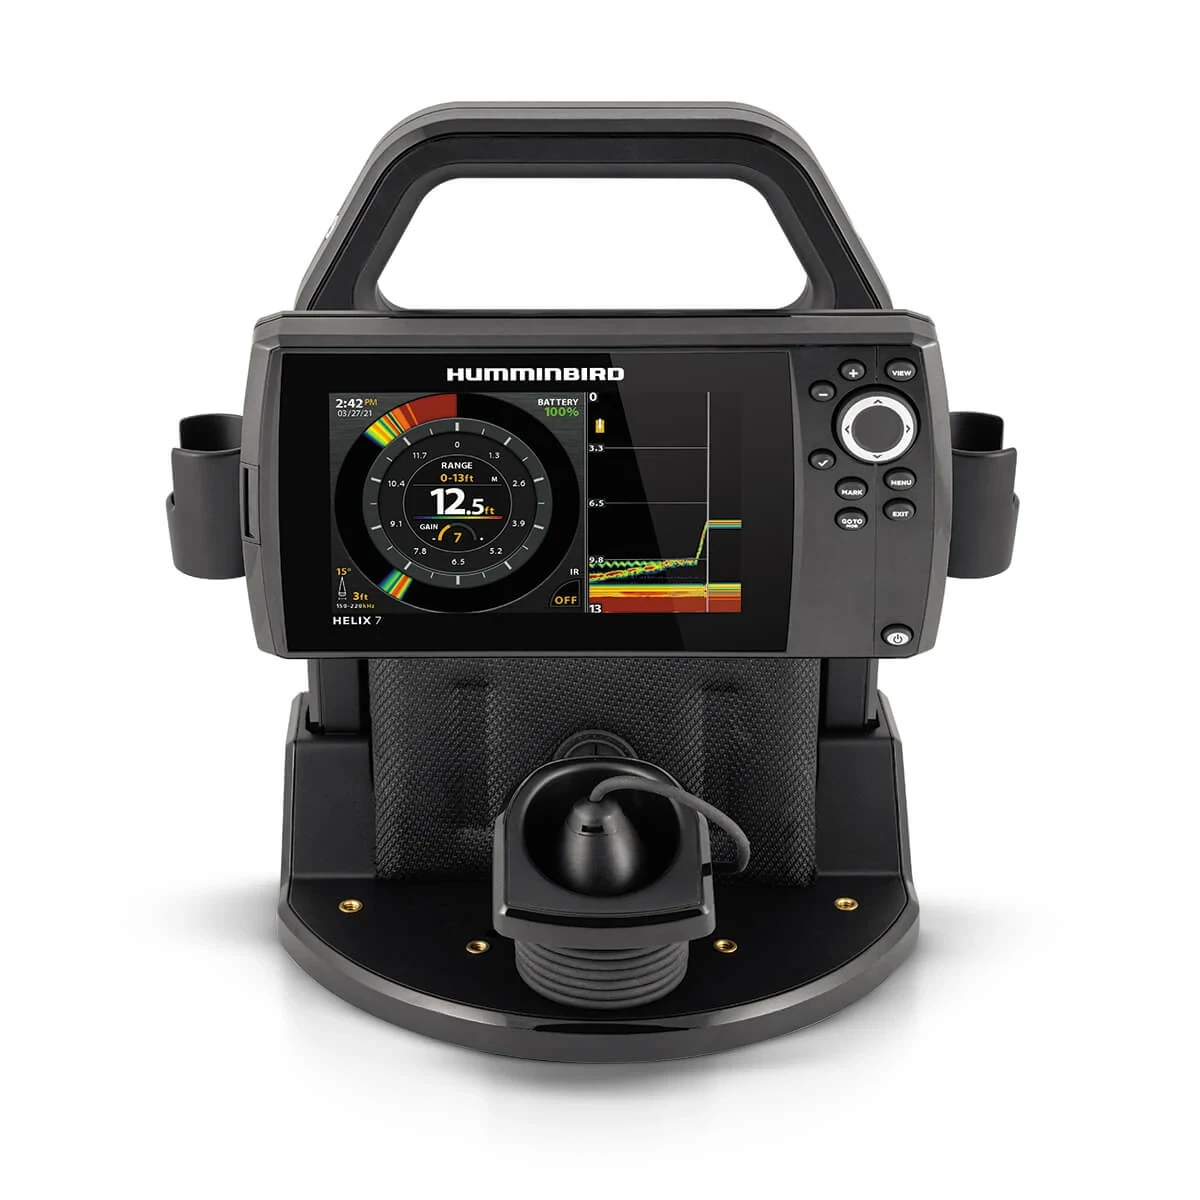 ICE HELIX 7 CHIRP GPS G4 shown with transducer tucked into the built-in tray in the shuttle